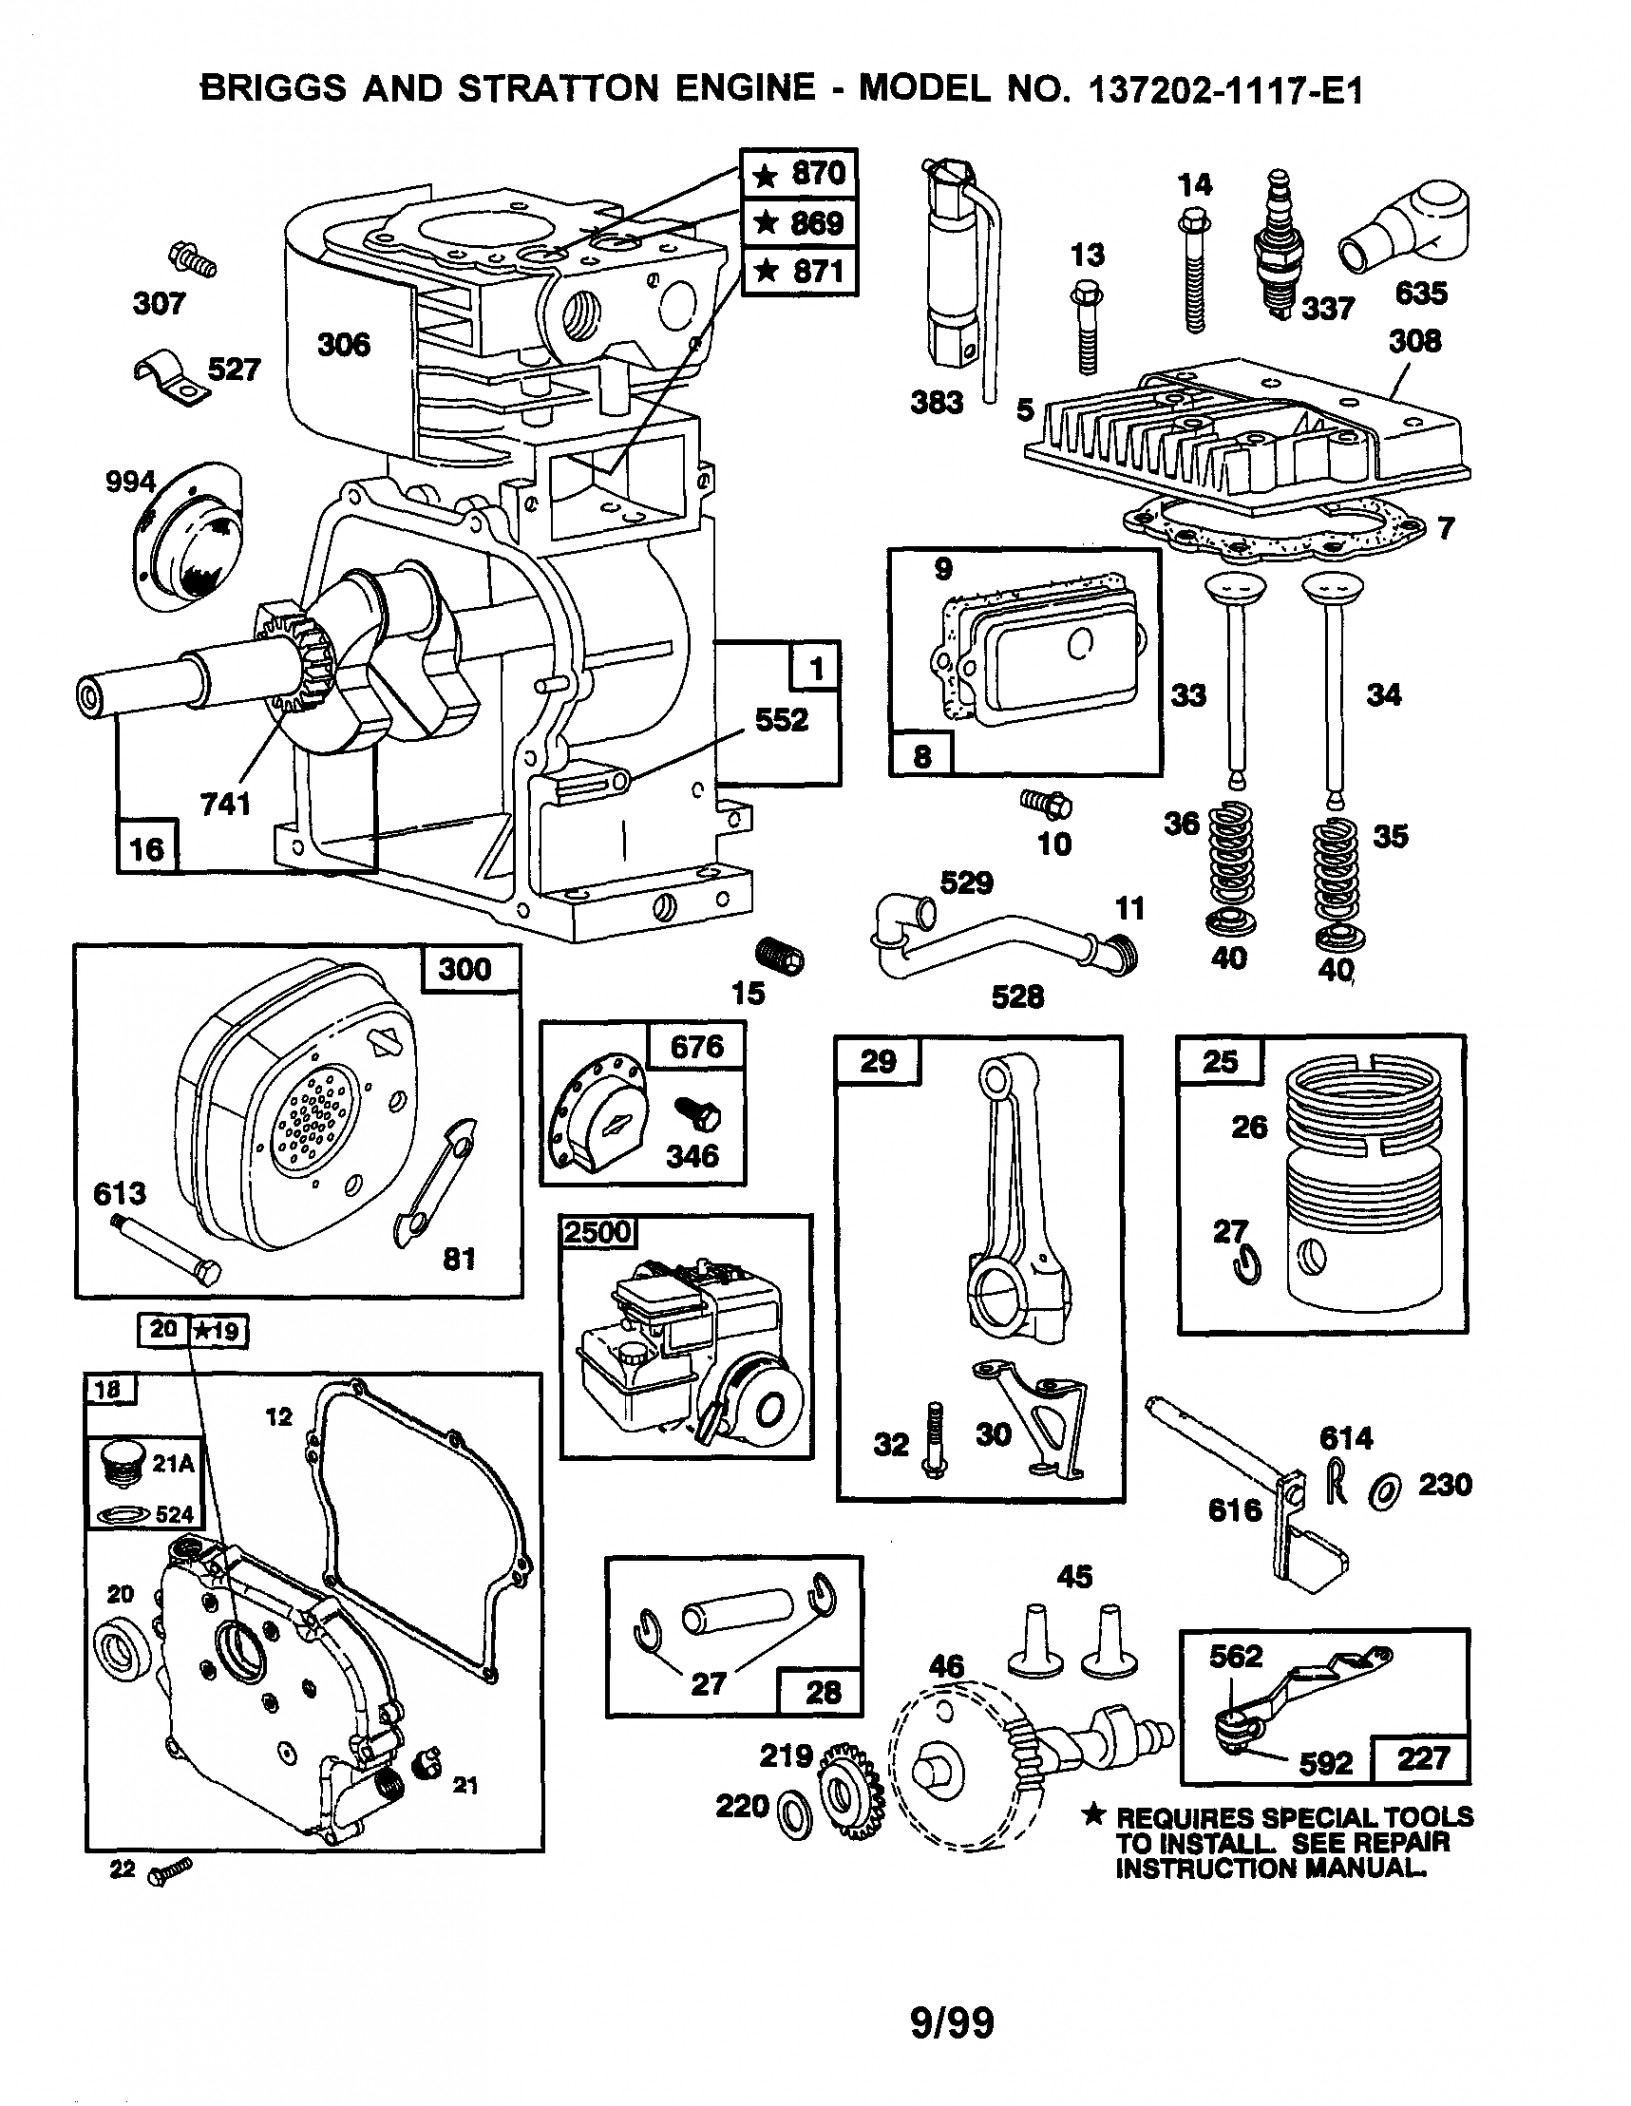 Briggs And Stratton Engine Troubleshooting Diagram – Wiring Diagram - Briggs And Stratton V-Twin Wiring Diagram